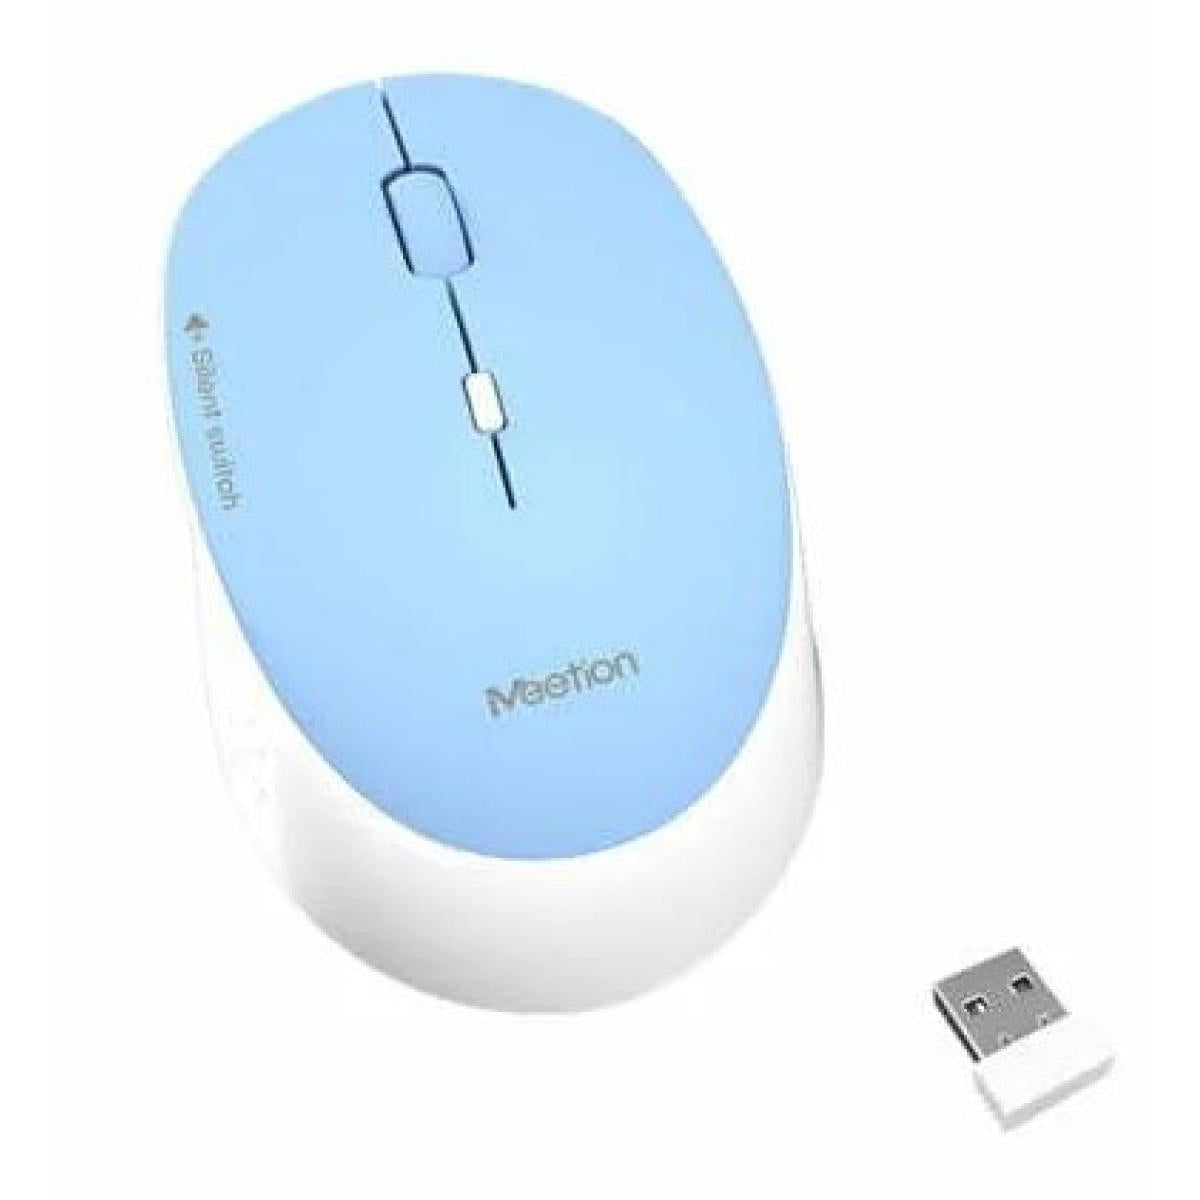 MeeTion 5 Colors Silent 2.4ghz Wireless Mouse